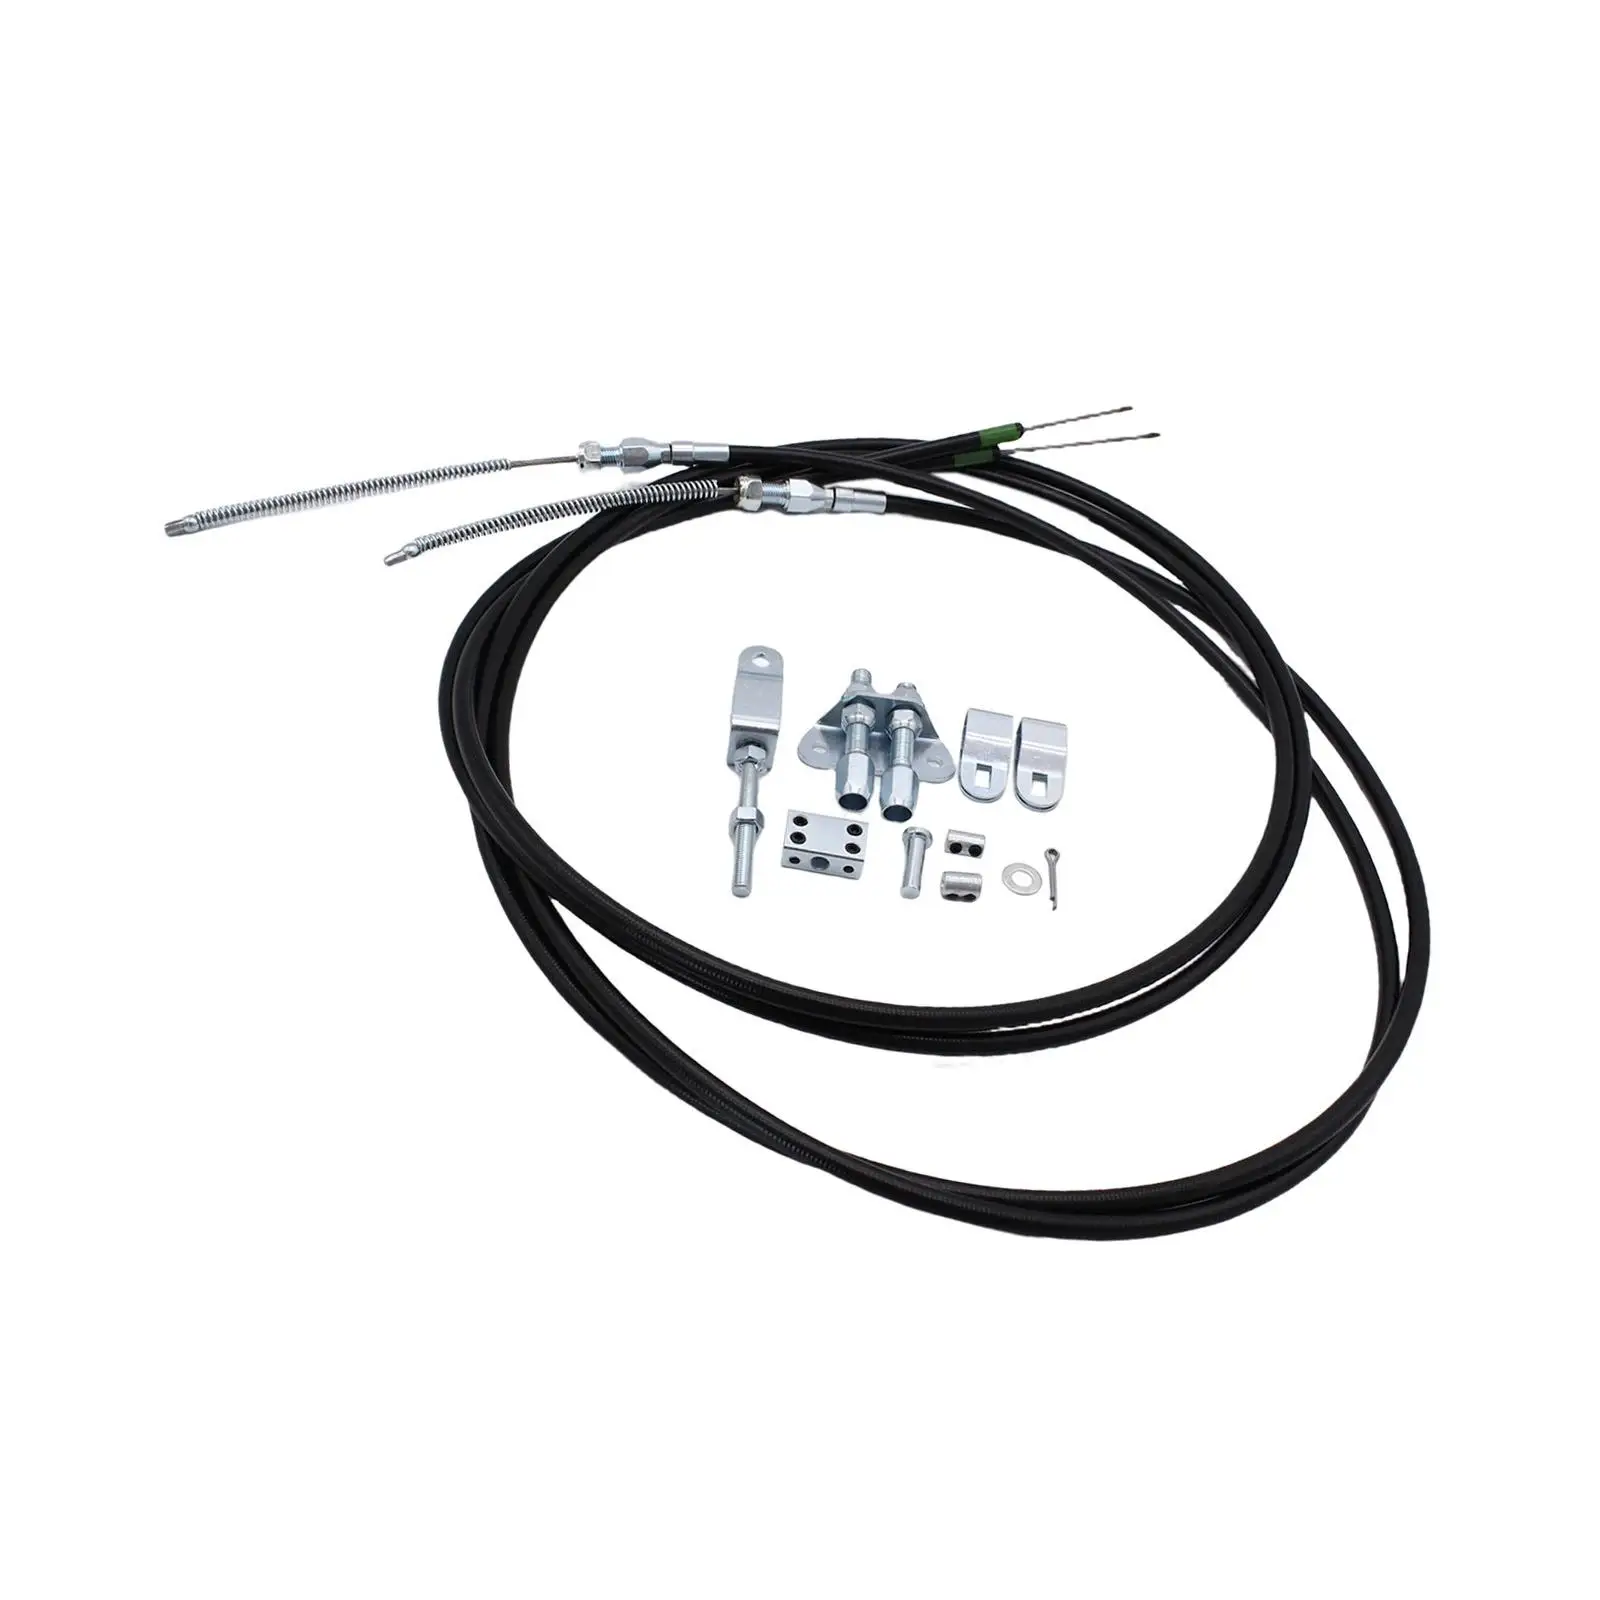 Emergency Parking Brake Cable Set 330-9371 Easily Install Sturdy Accessory